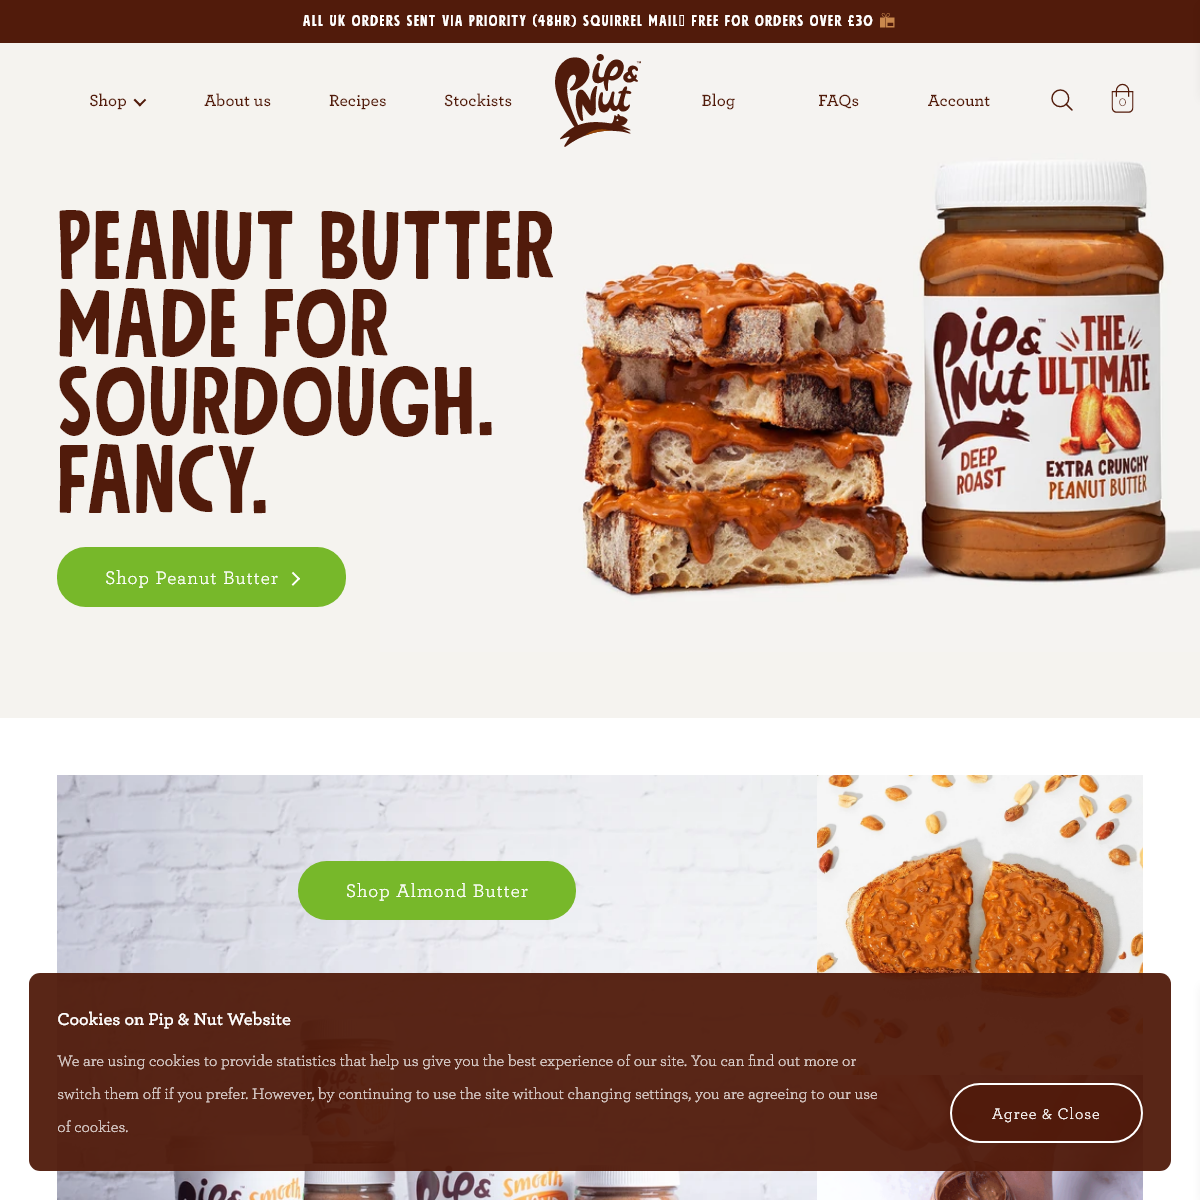 A complete backup of pipandnut.com